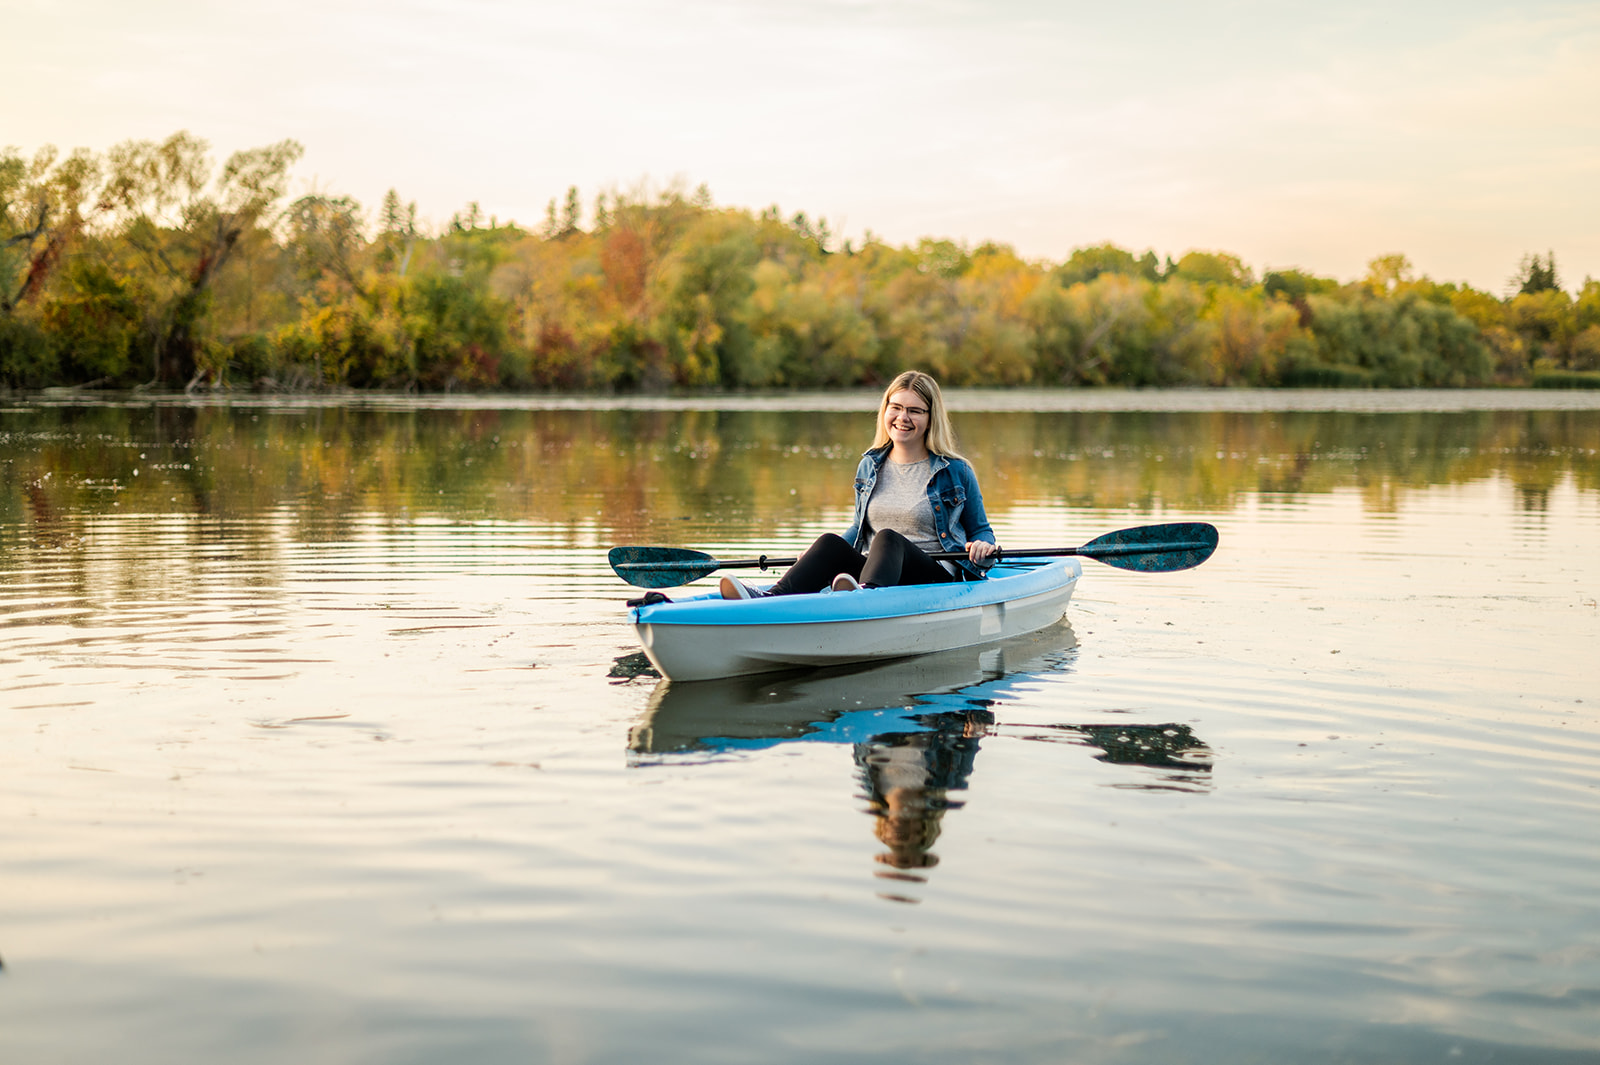 Katelyn kayaking on a river in fall